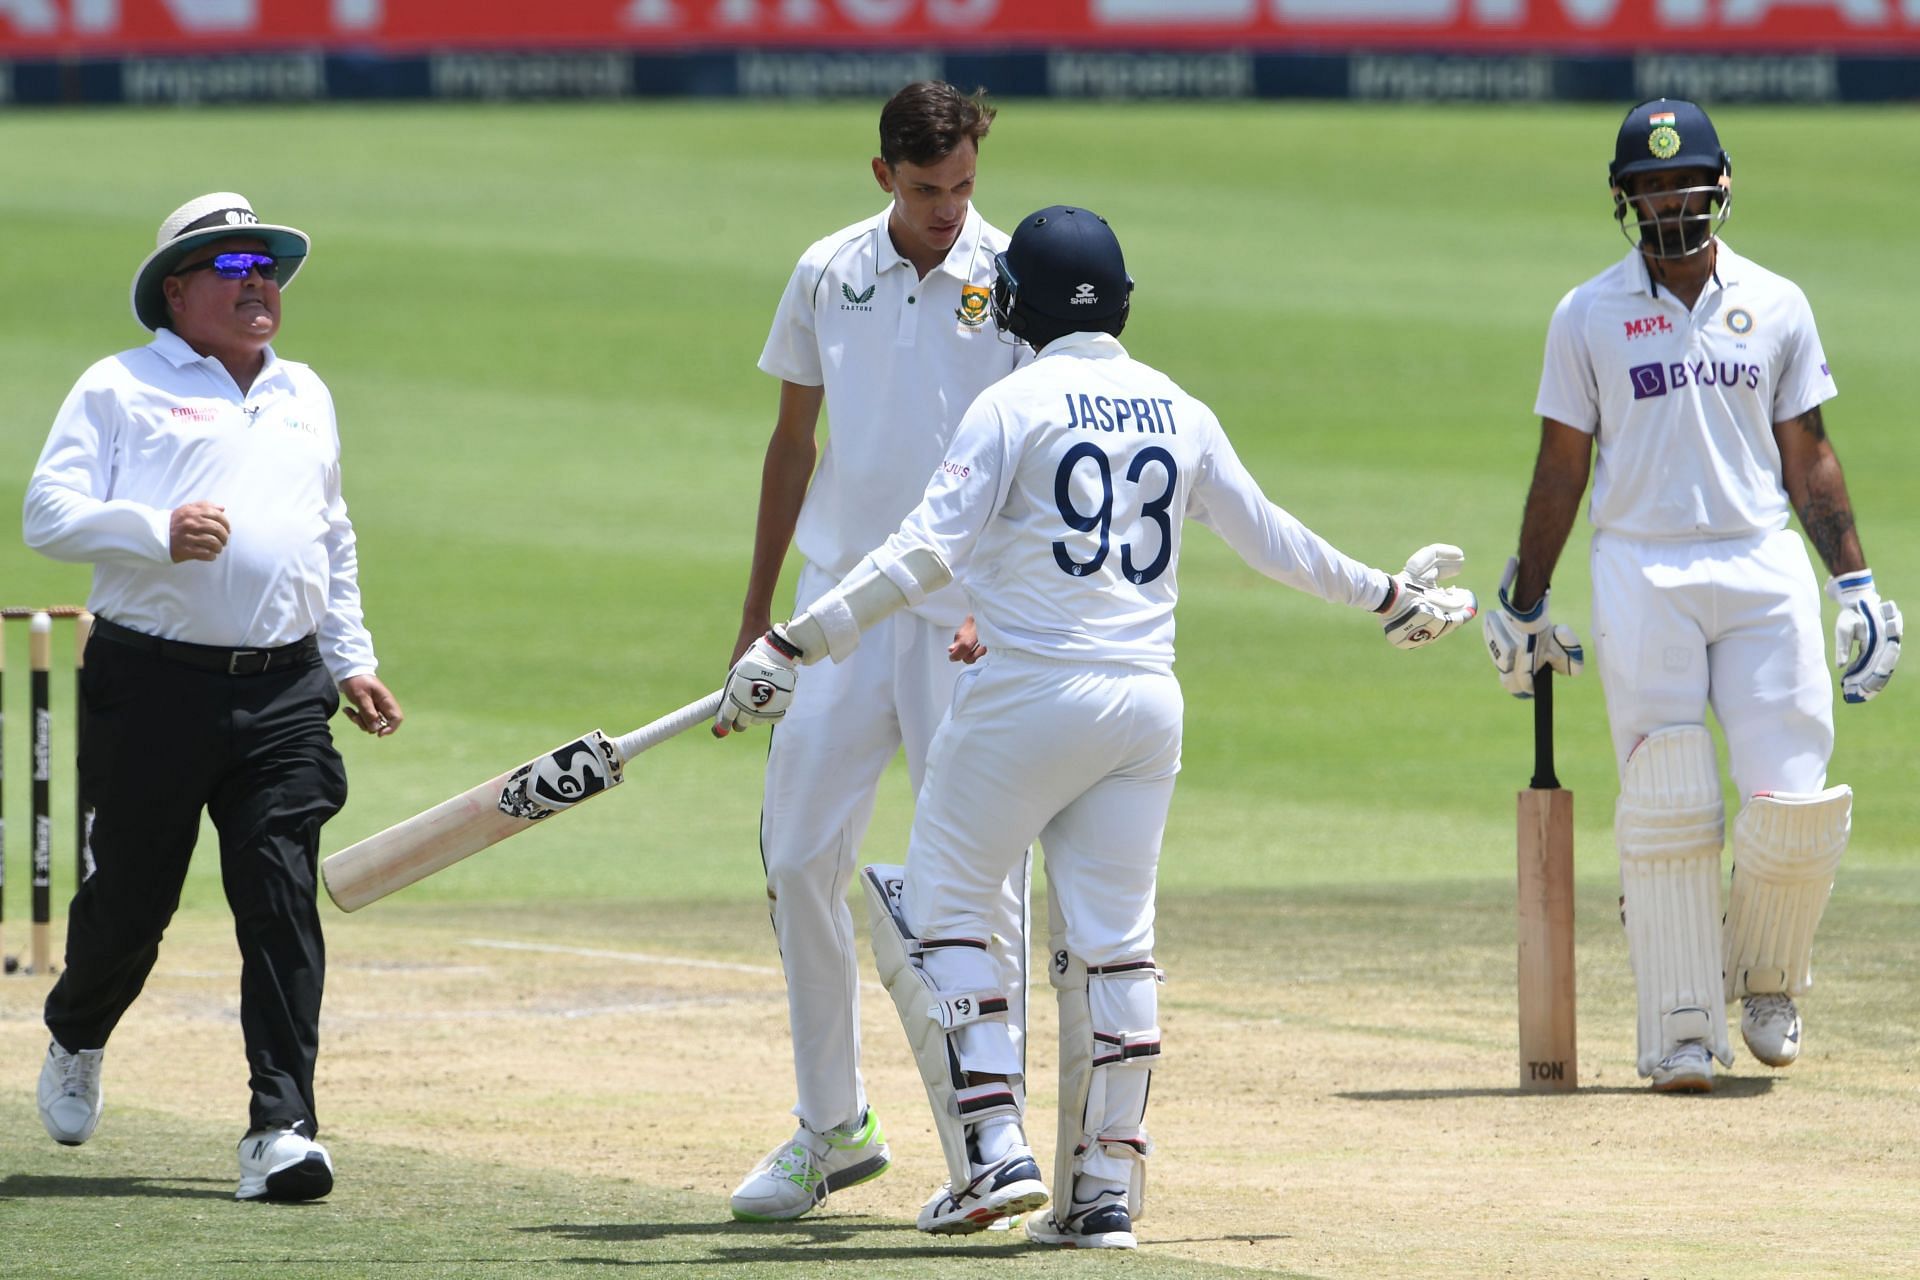 2nd Test: South Africa v India - Day 3